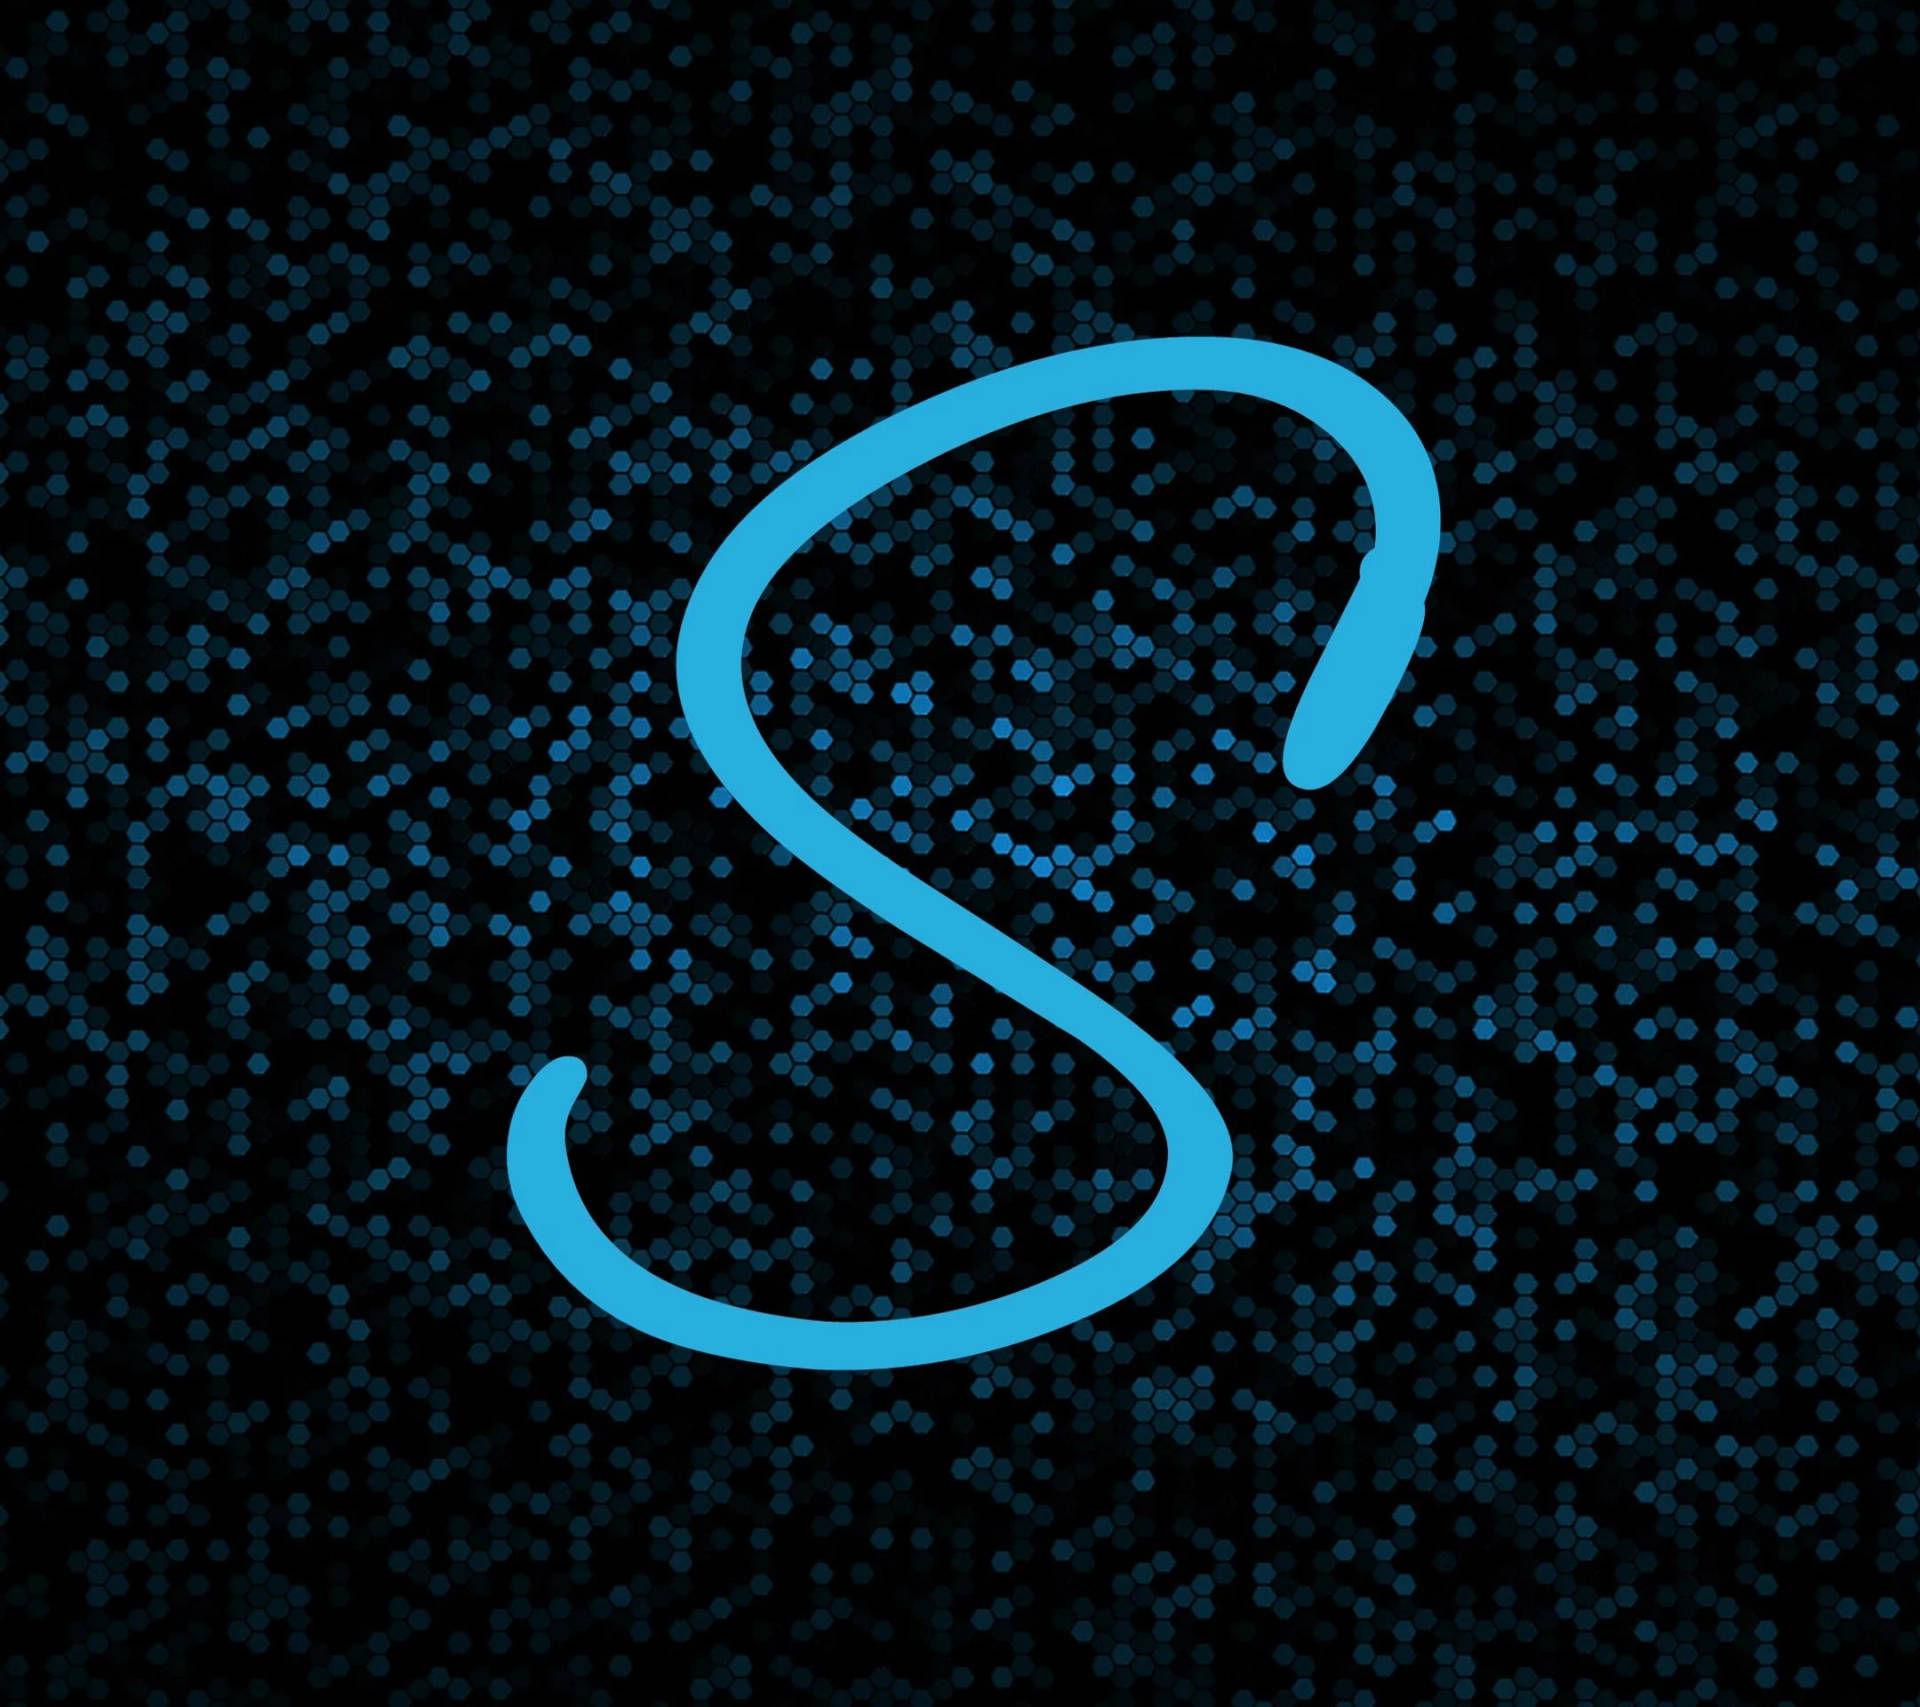 Free Letter S Wallpaper Downloads, [200+] Letter S Wallpapers for FREE |  